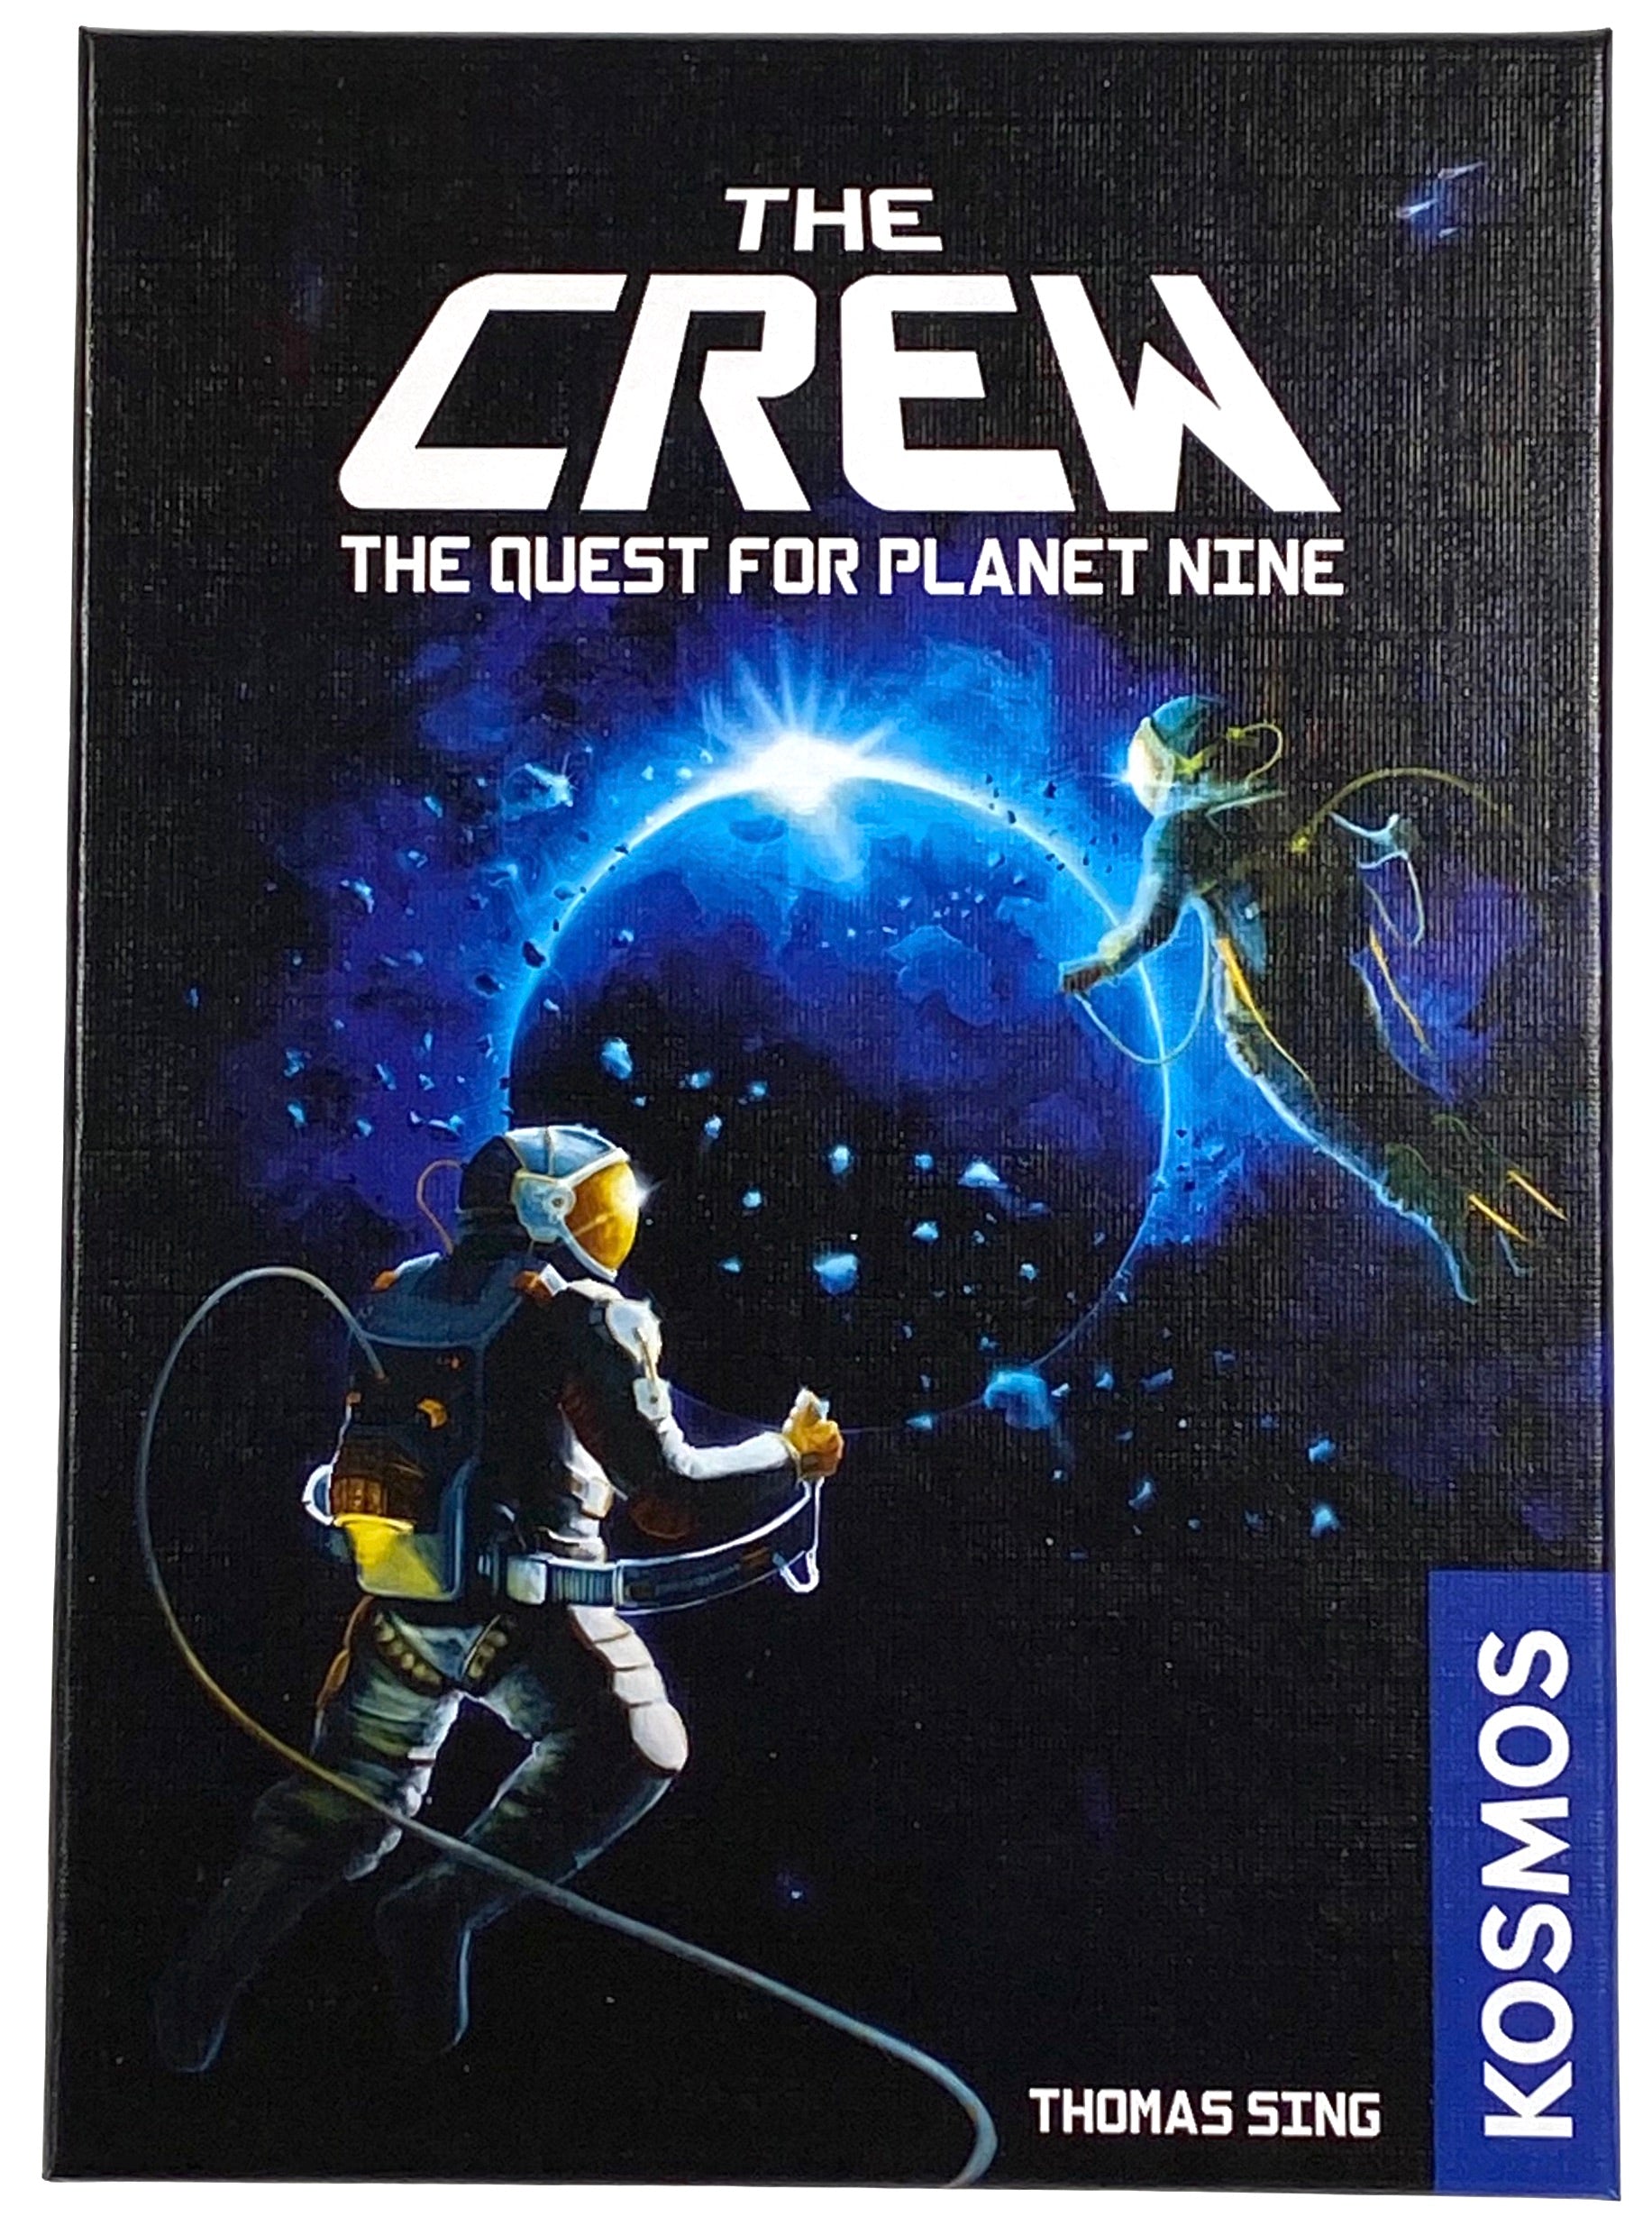 The Crew - The Quest For Planet Nine    